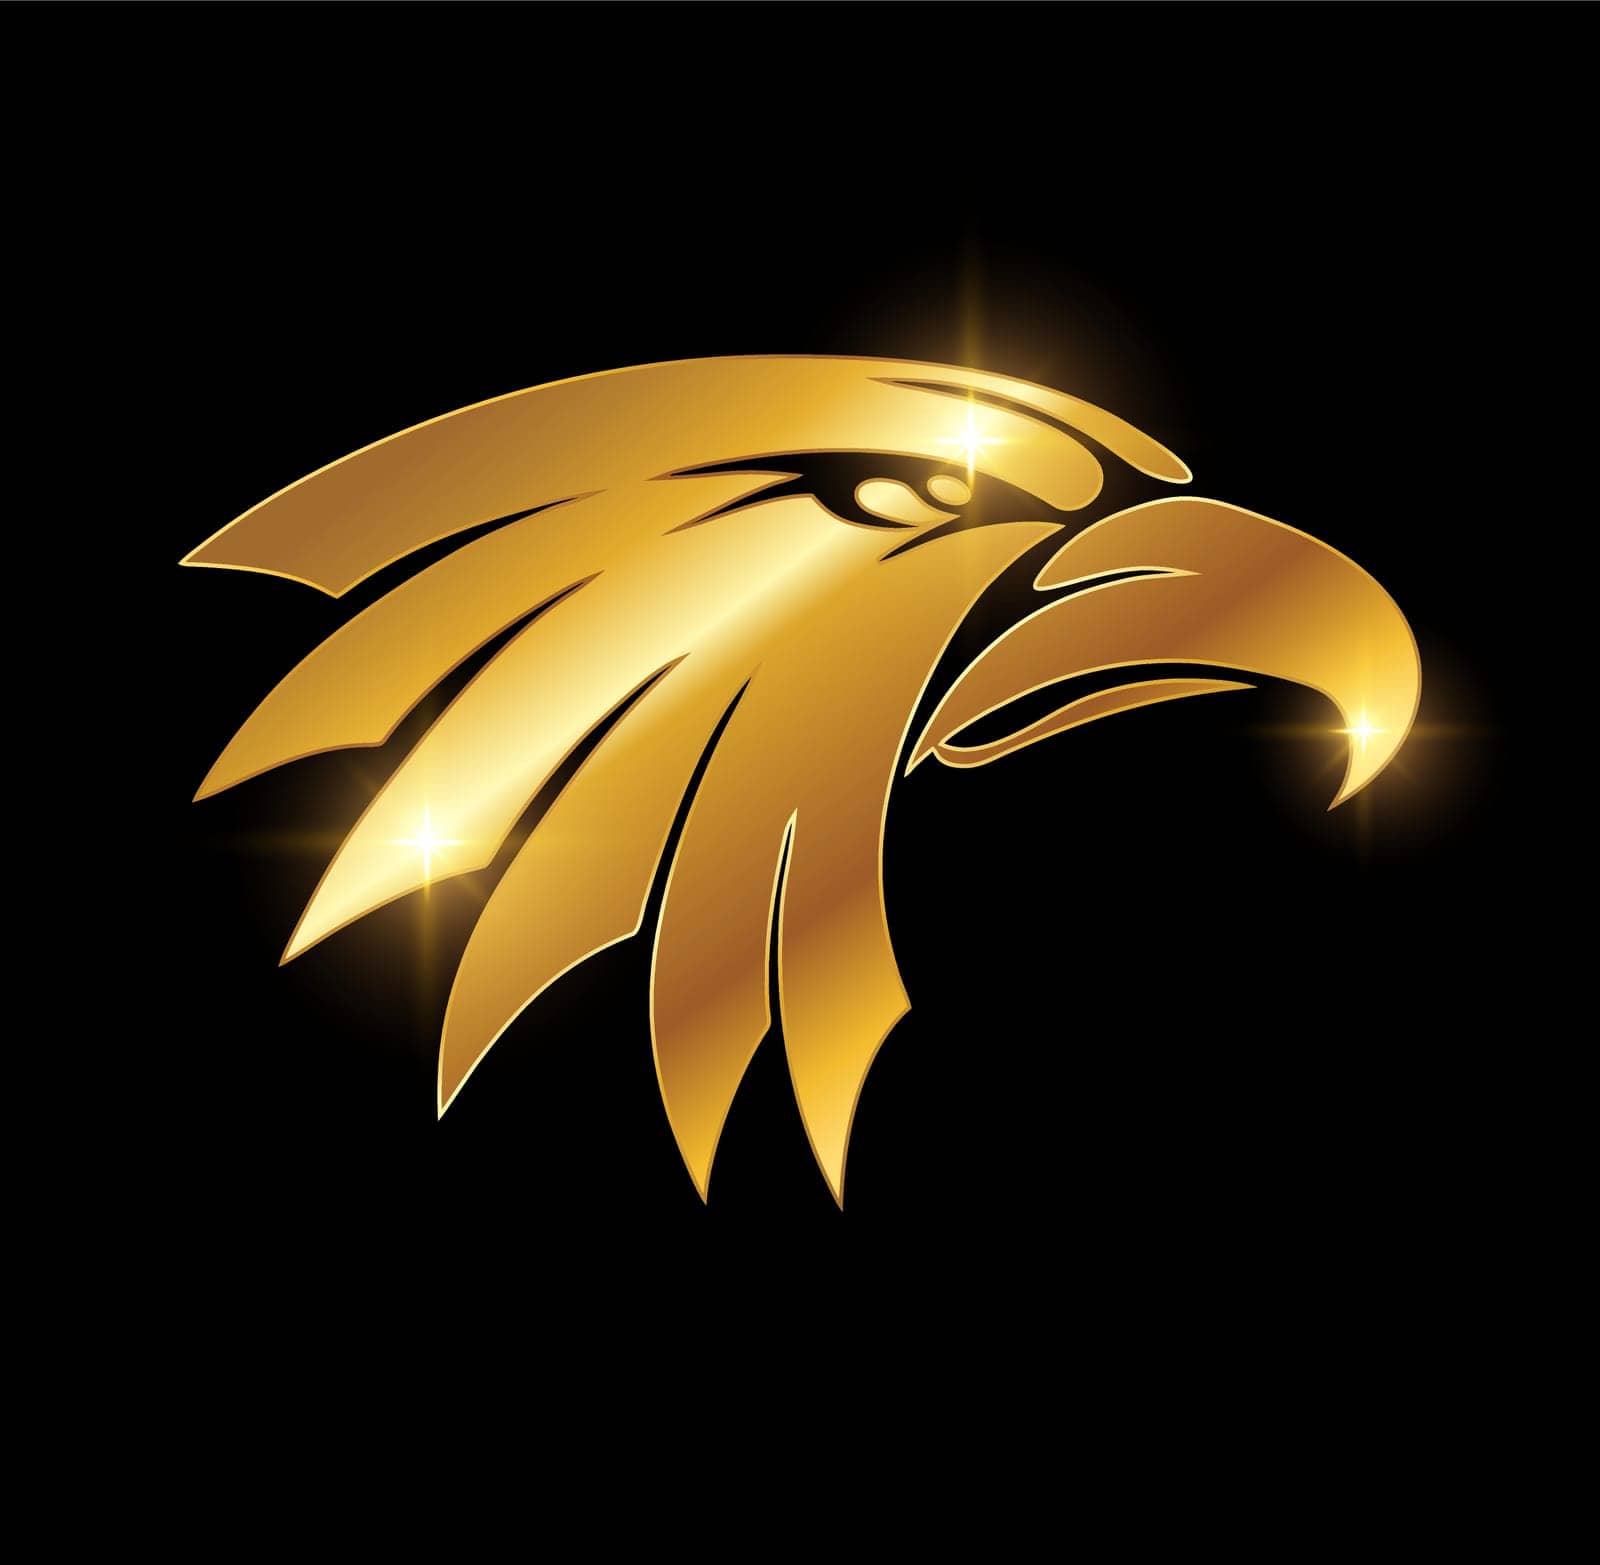 A vector Illustration  in black background with gold shine effect of Golden Eagle Head Logo Sign